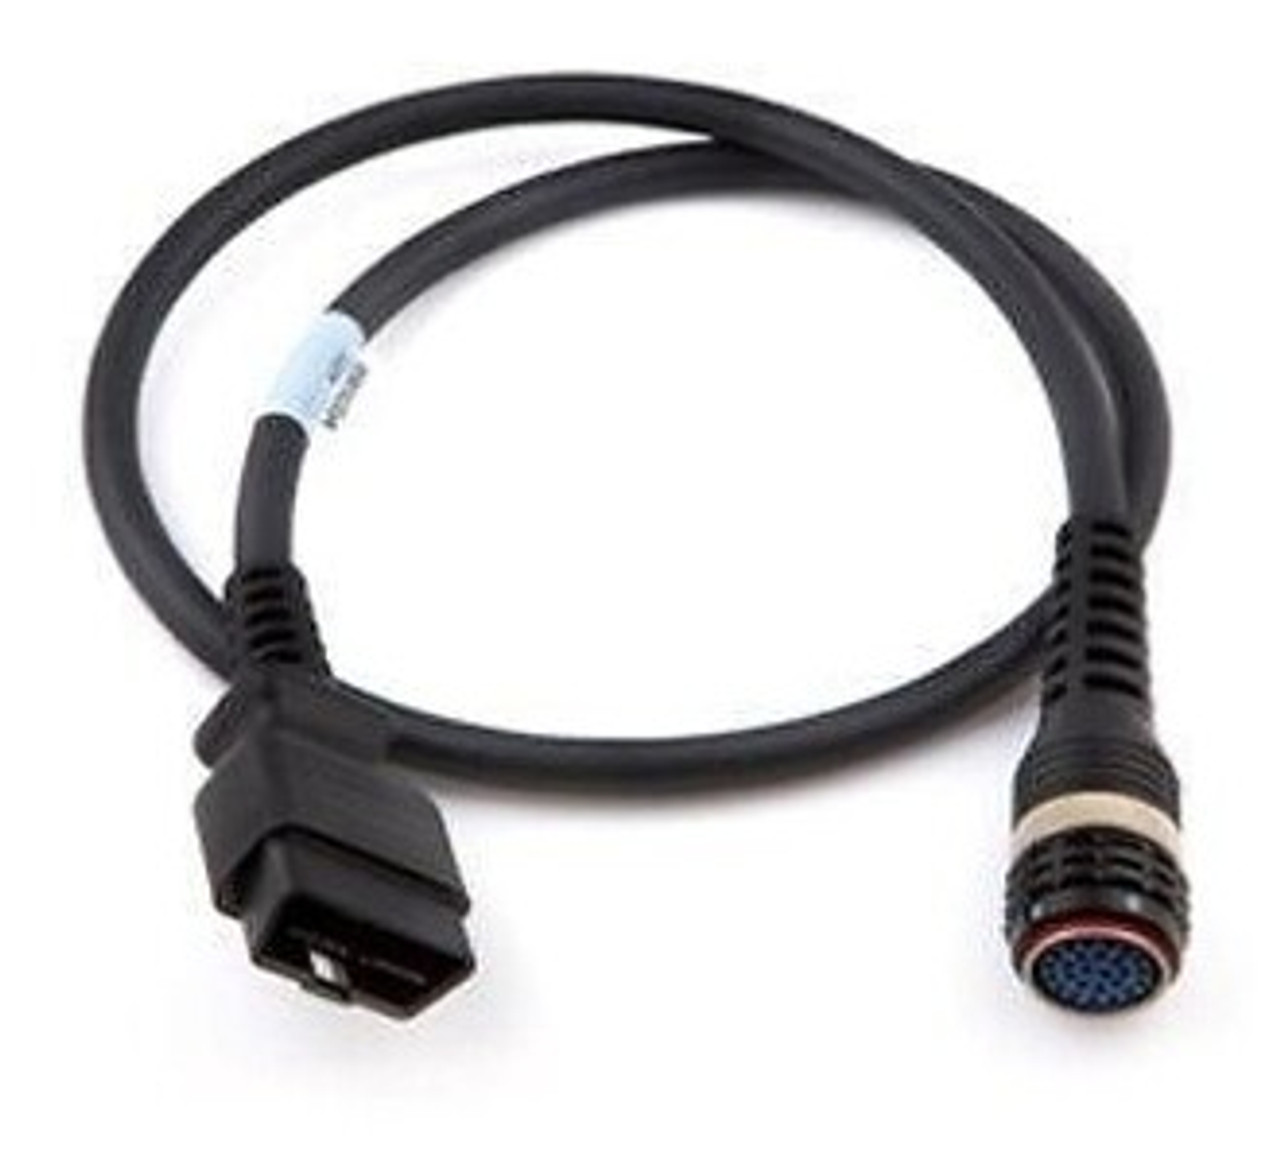 Volvo VOCOM II 88894000 Adapter with Datalink 88890313 USB Cable, 88894001 OBD Cable and 88890315 Deutsch (9-pin) cable capable of ECU programming kit.